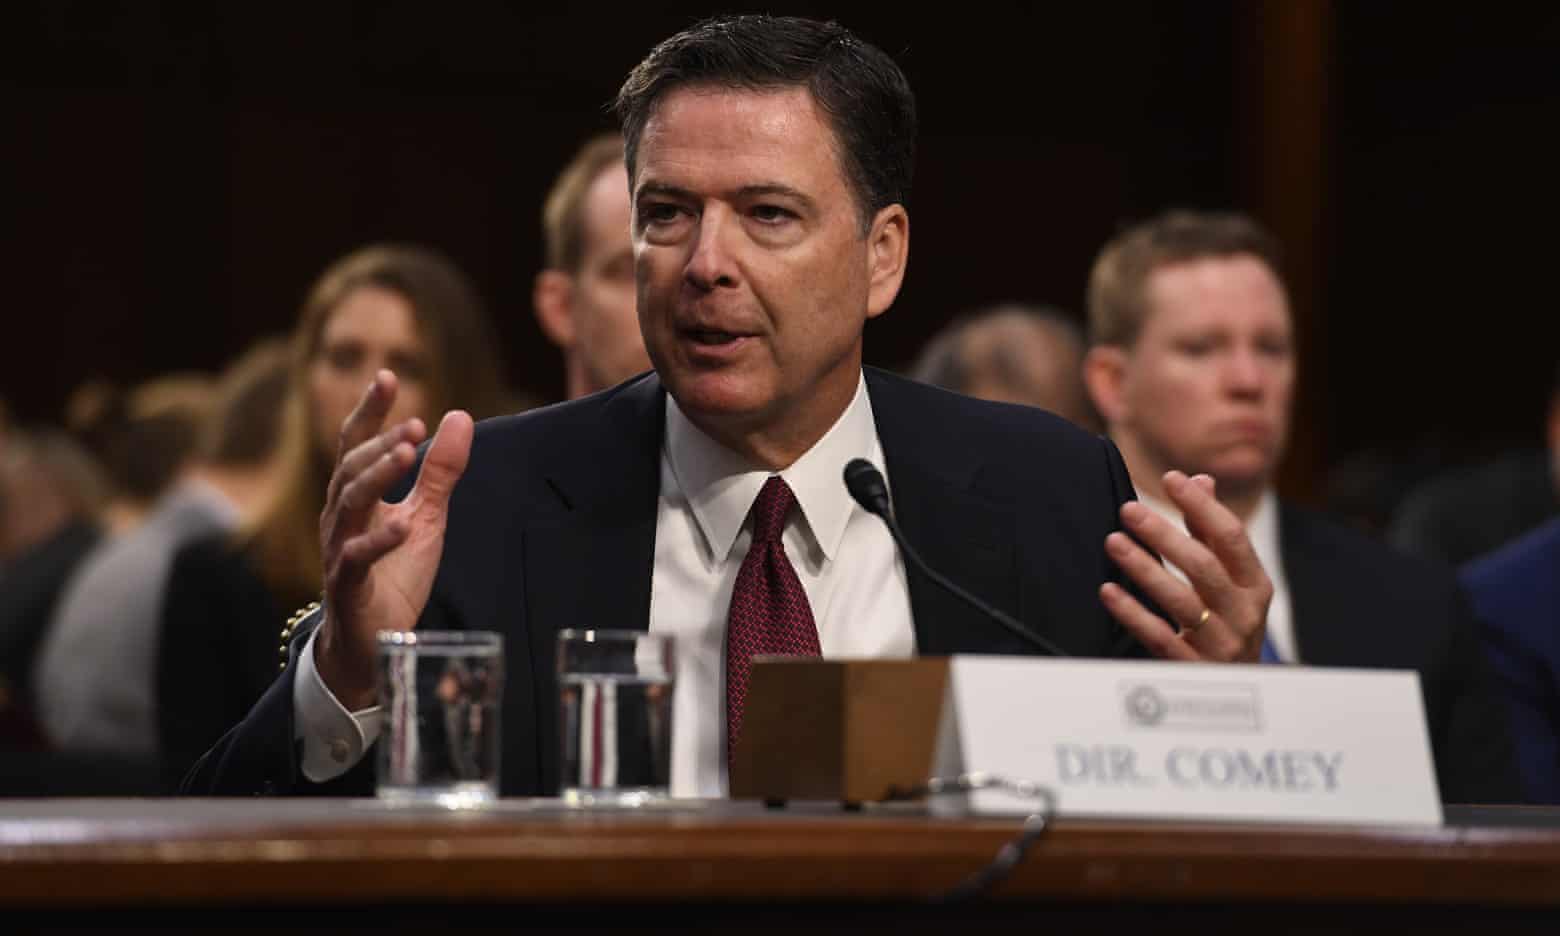 Former FBI director James Comey testifies in front of the Senate intelligence committee Thursday in Washington.